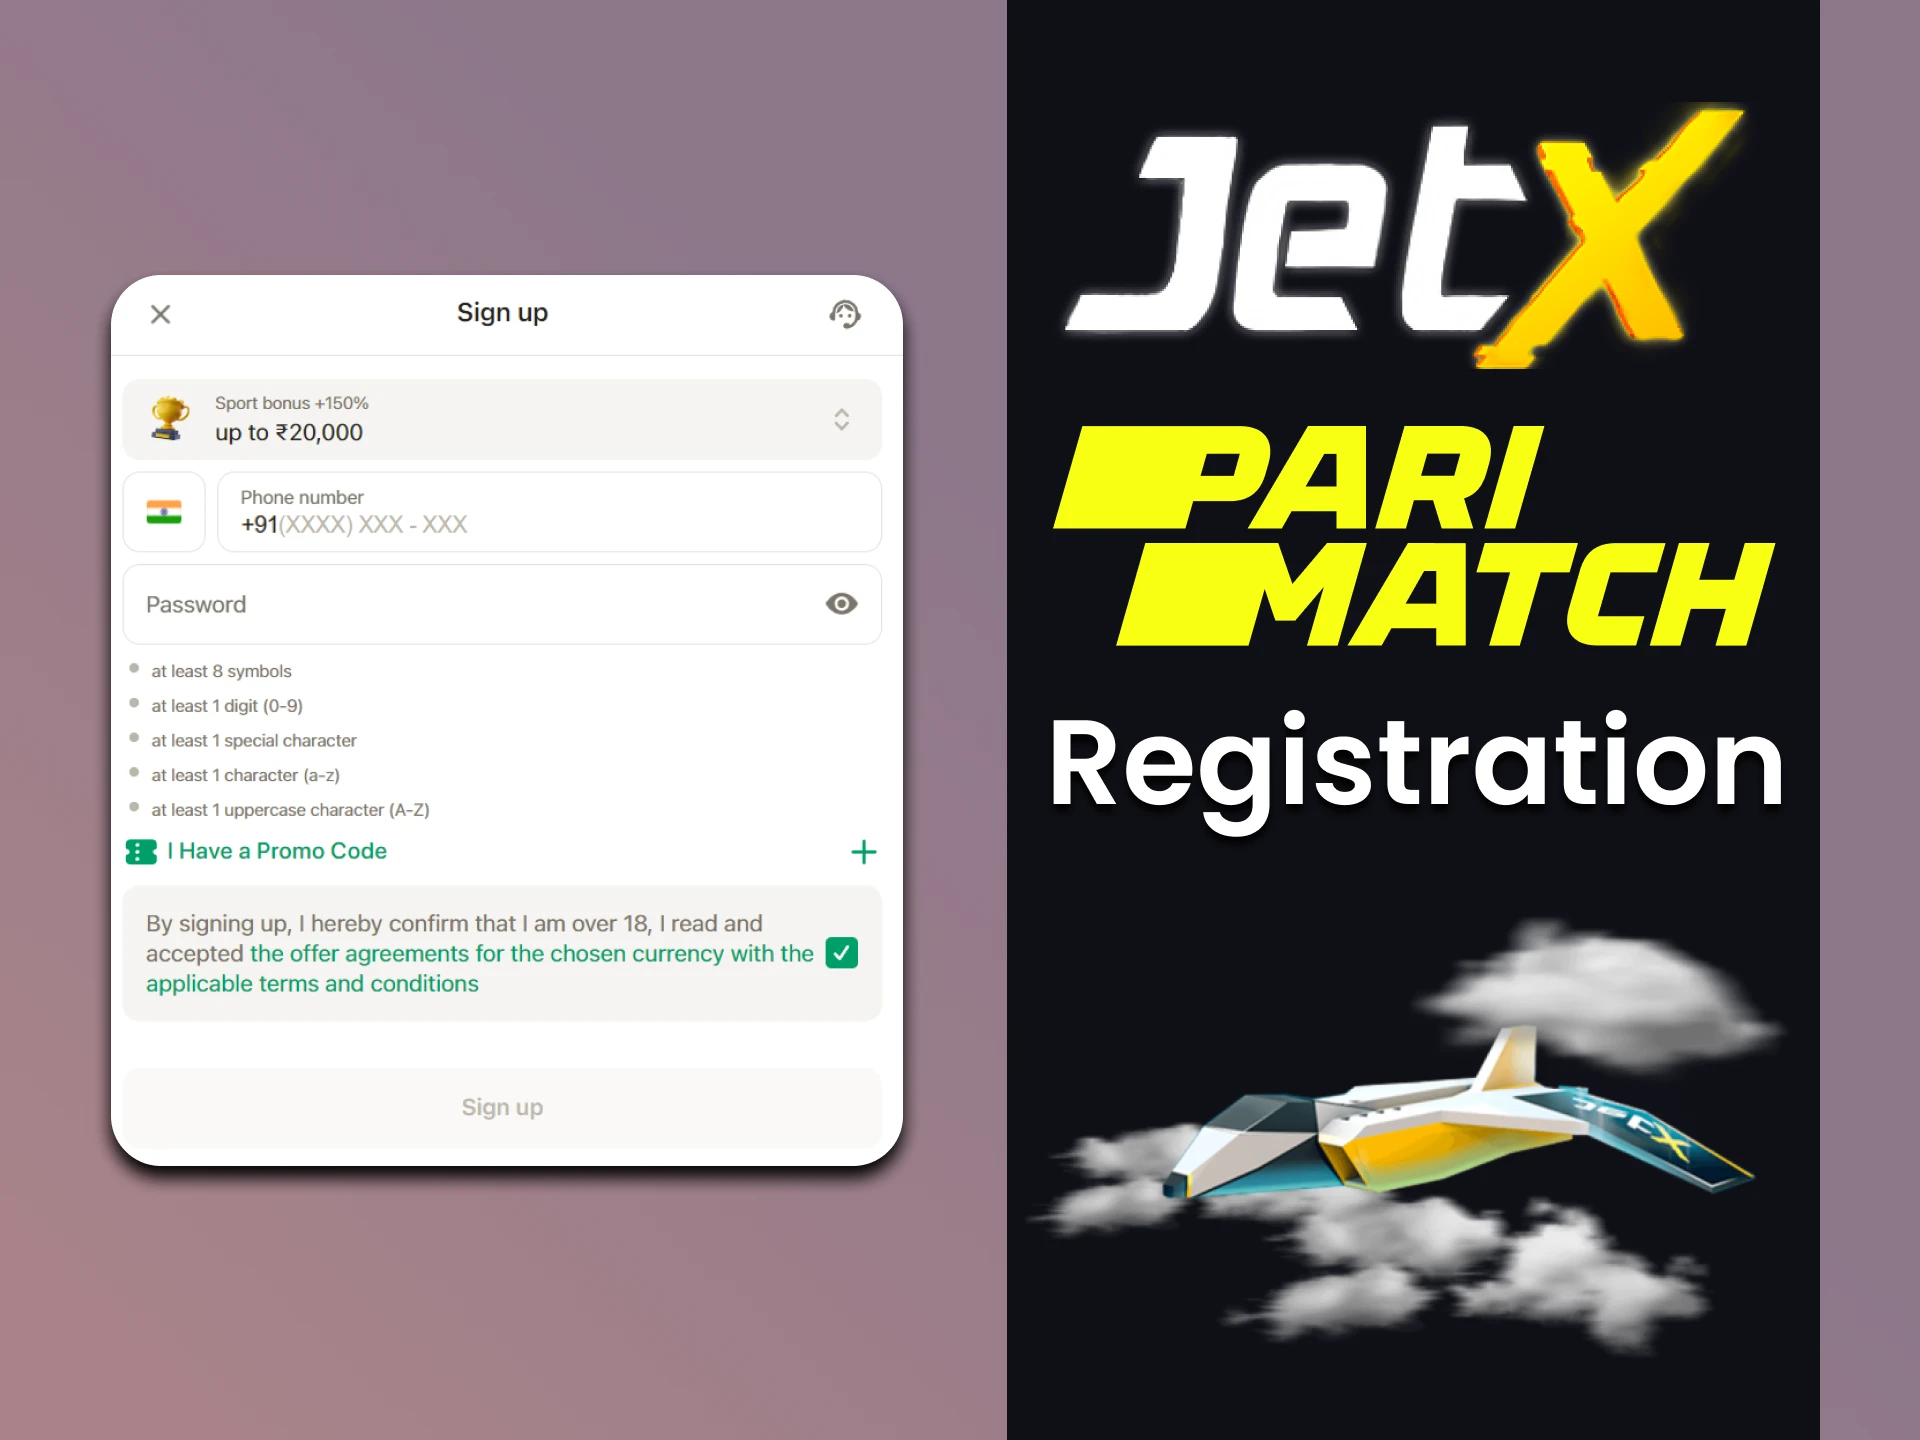 To play JetX on Parimatch you must register.